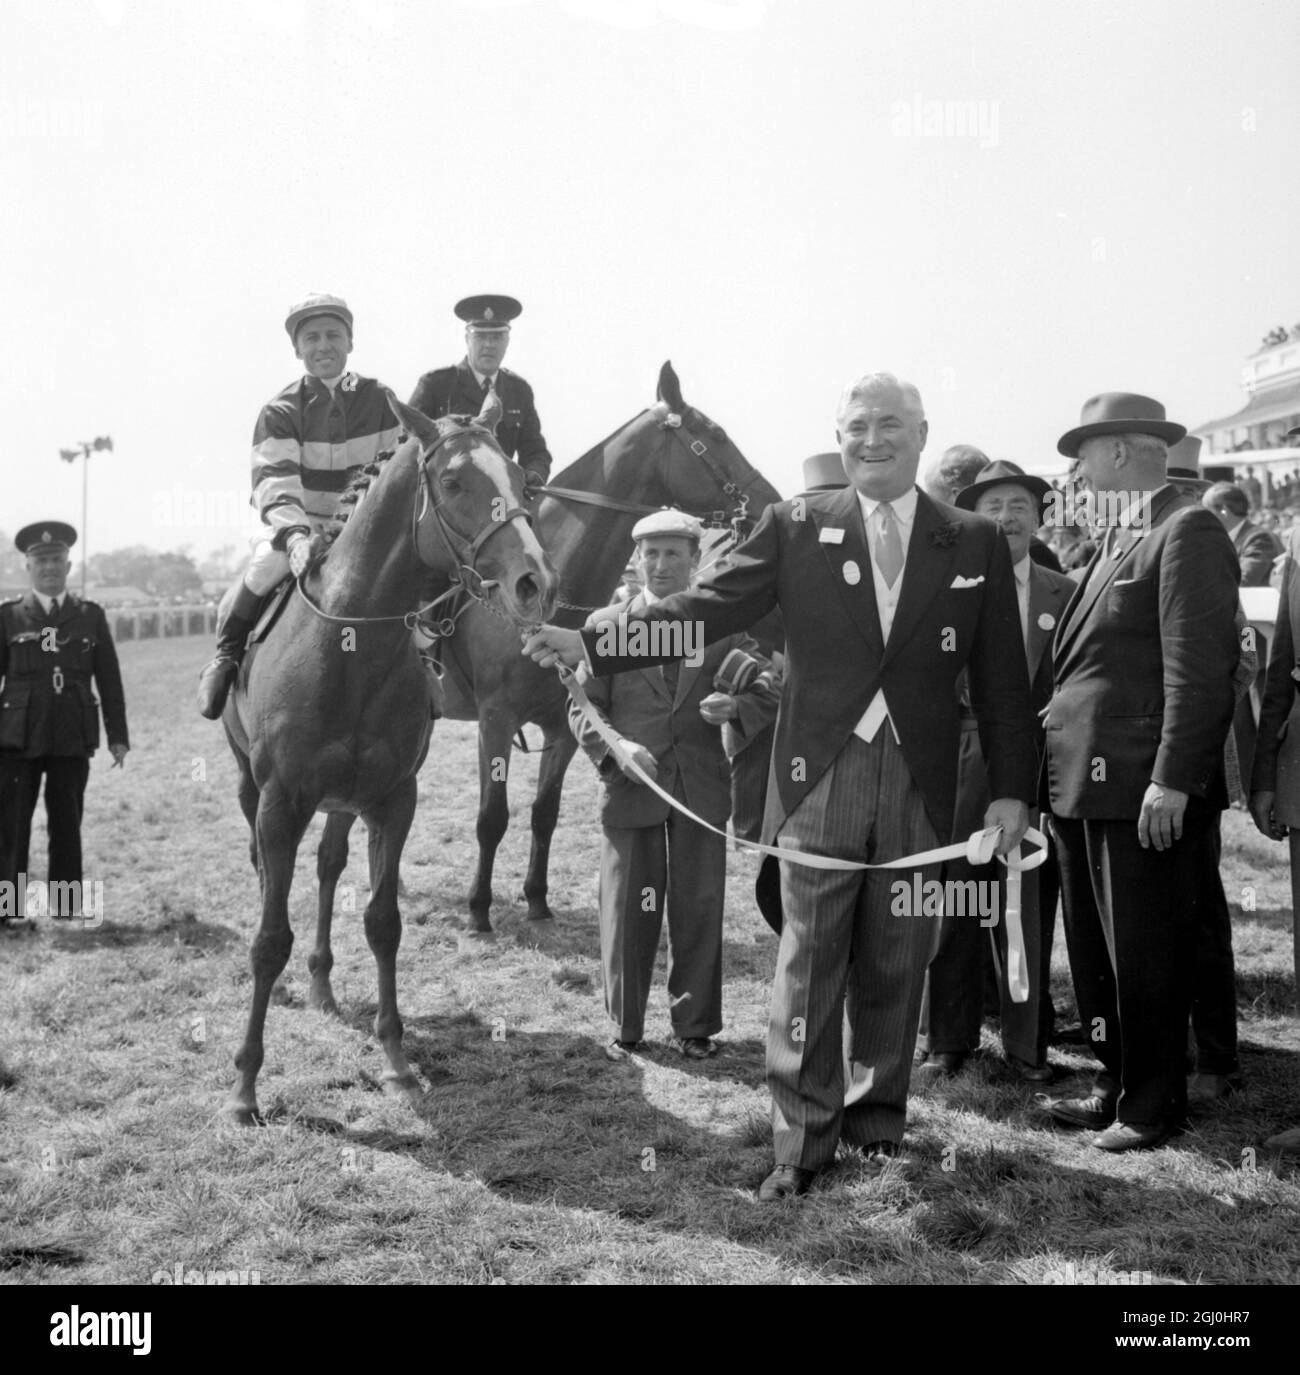 Epsom, Surrey, England: Beaming with delight, New Yorker, Raymond Guest leads in his horse Larkspur, with Australian Jockey Neville Sellwood in the saddle after it had won the 183rd Derby Stakes here today. Second was Arcor, owned by French Textile magnate Marcel Boussac, and ridden by roger Poincelet, and third was Le Cantilien, owned by Mme Suzy Volterra and ridden by Yves Saint-Martin. 6 June 1962 Stock Photo